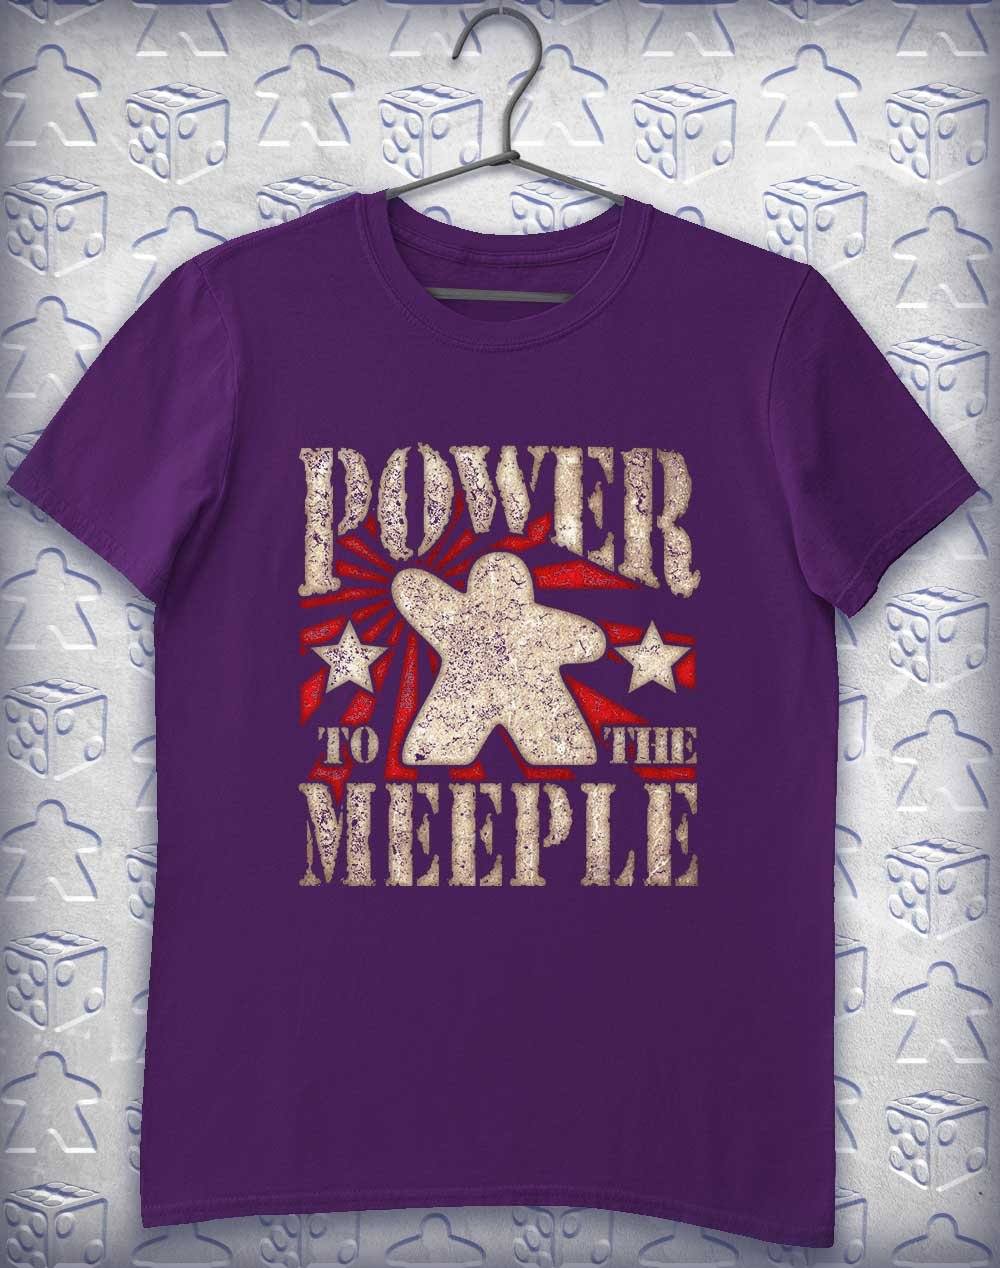 Power to the Meeple Alphagamer T-Shirt S / Purple  - Off World Tees